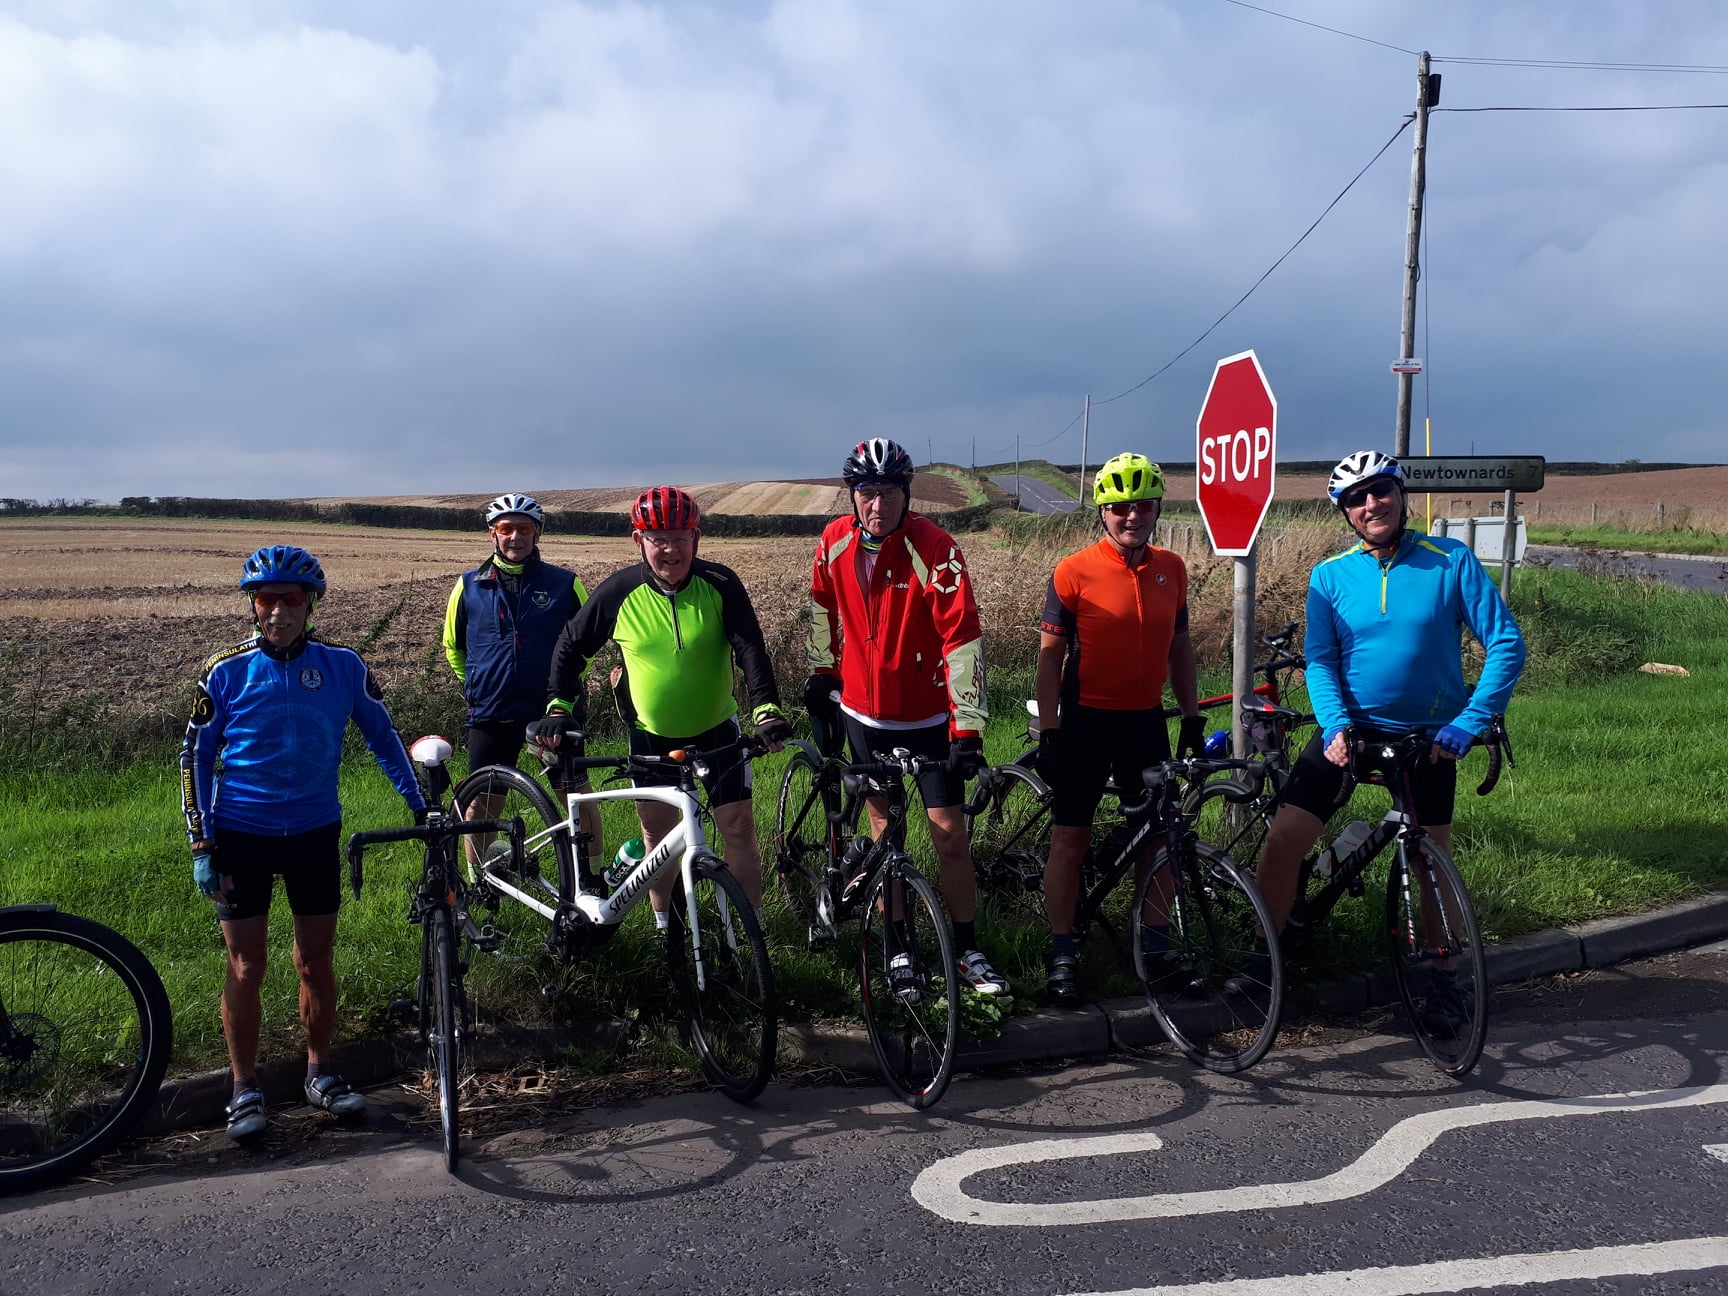 Groomsport to Greyabbey - 2nd Day of Festive Rides!